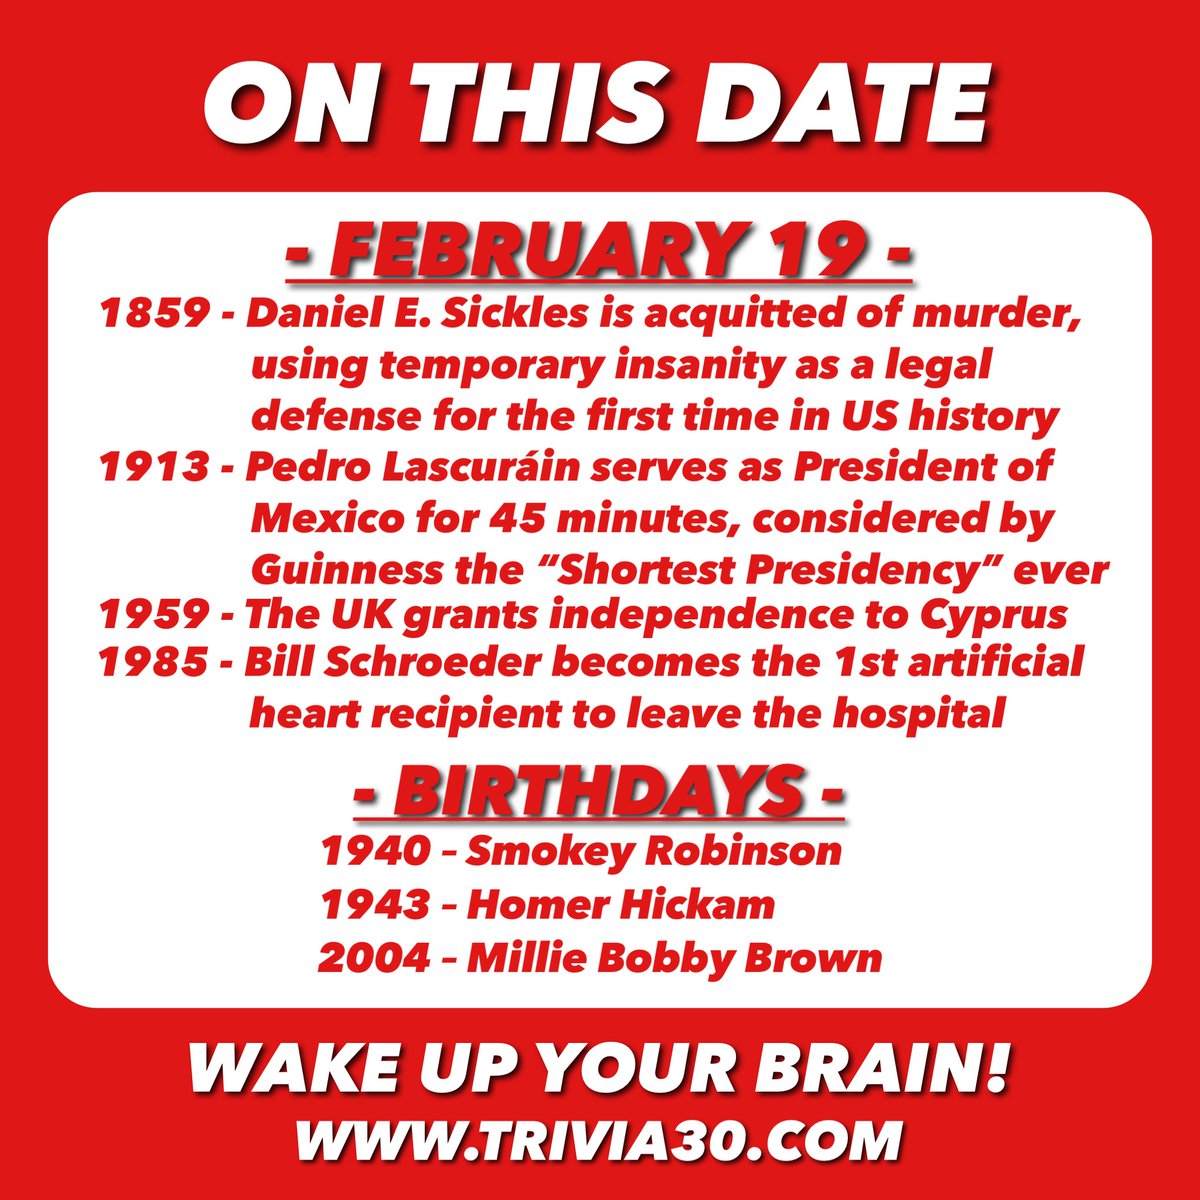 Your 2/19 OTD trivia... Join us at 5:00 at Marlin & Barrel for Mardi Gras trivia, or 6:30 for TRIVIA:30 Online, and have a great Sunday! #trivia30 #wakeupyourbrain #Mexico #Cyprus #medicalhistory #Jarvik7 #SmokeyRobinson #TheMiracles #HomerHickam #MillieBobbyBrown #StrangerThings